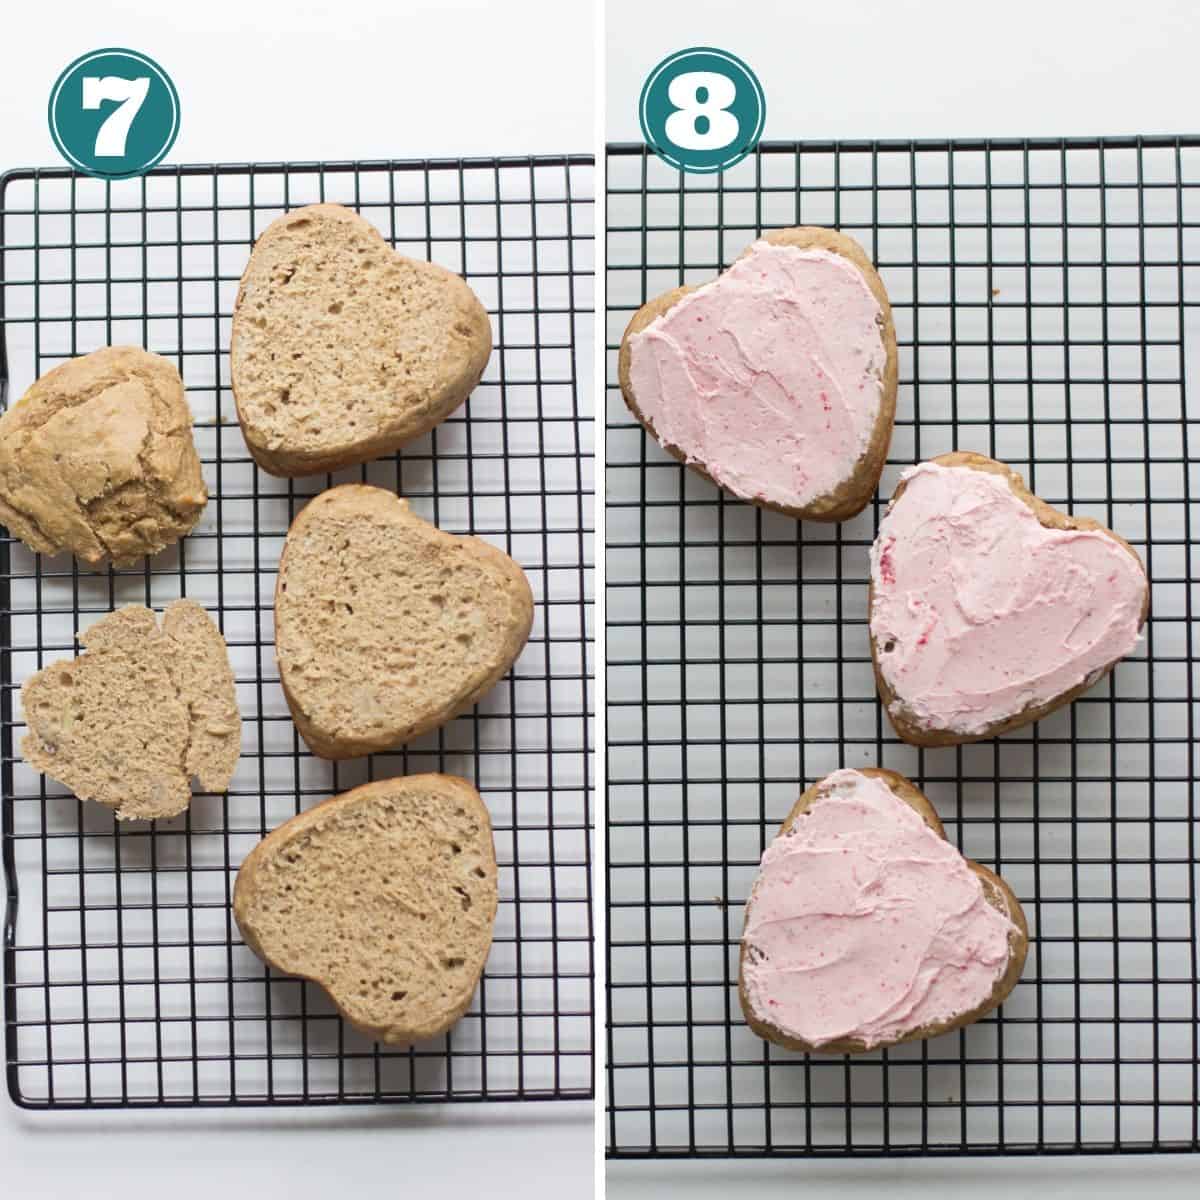 a two image collage showing cakes before frosted and then after.